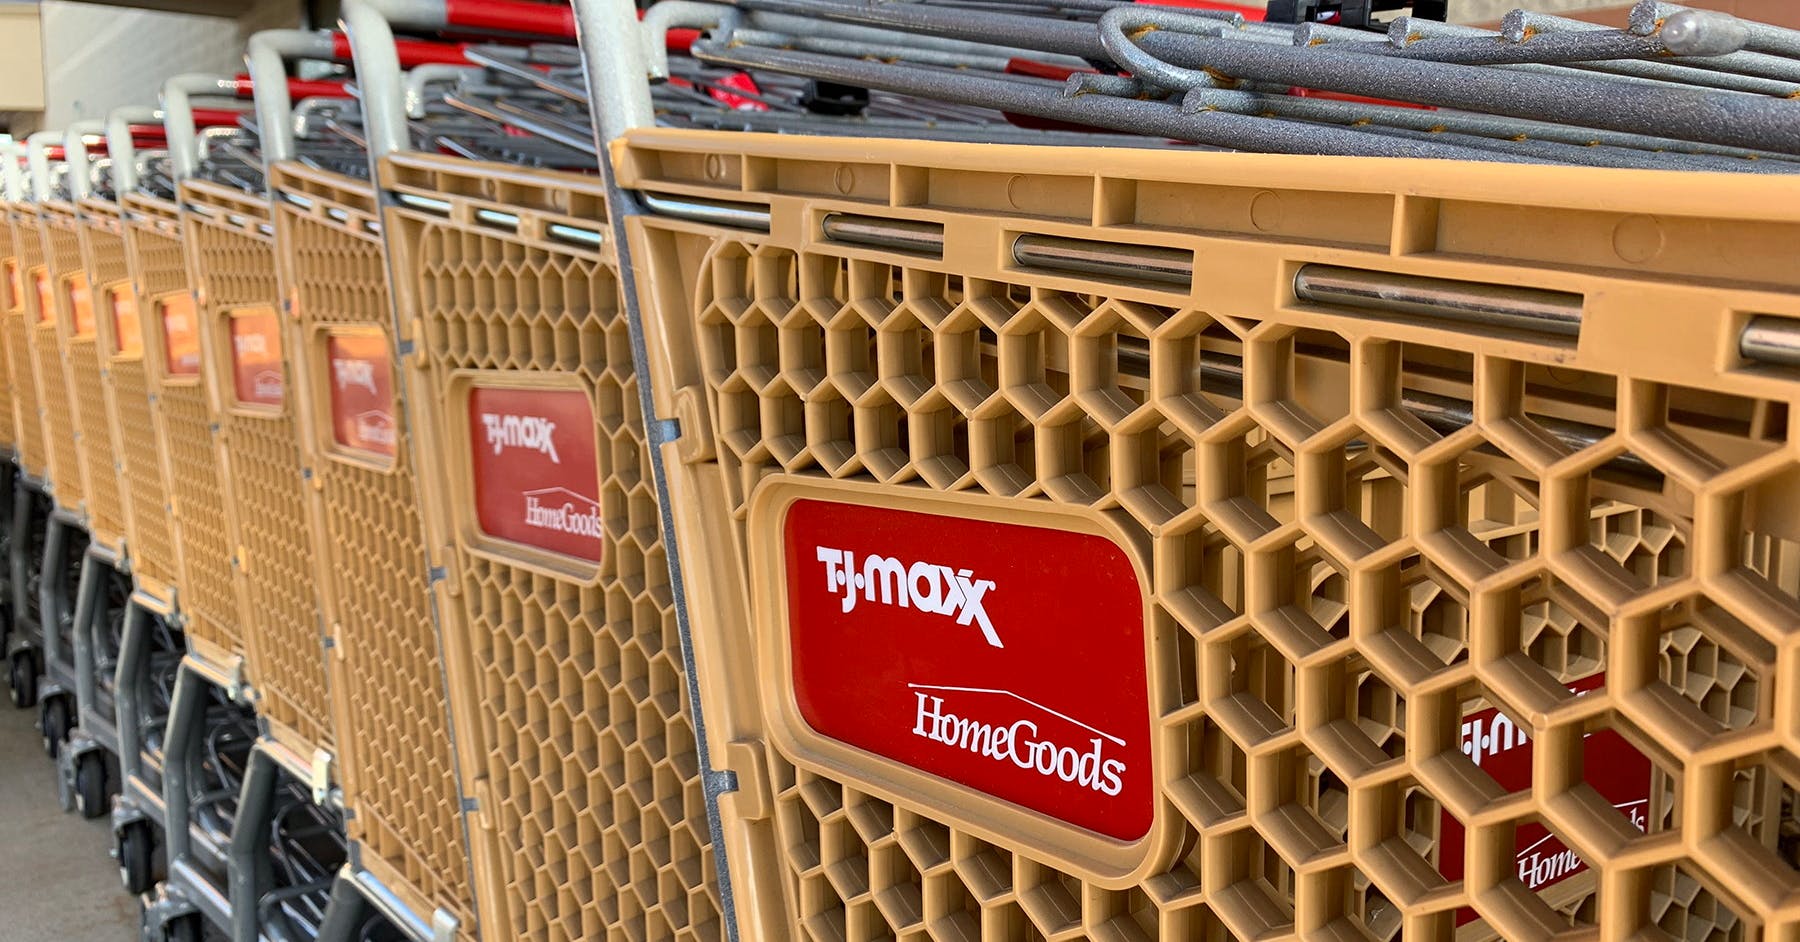 T.J.Maxx Just Started Taking Online Orders Again - The Krazy Coupon Lady